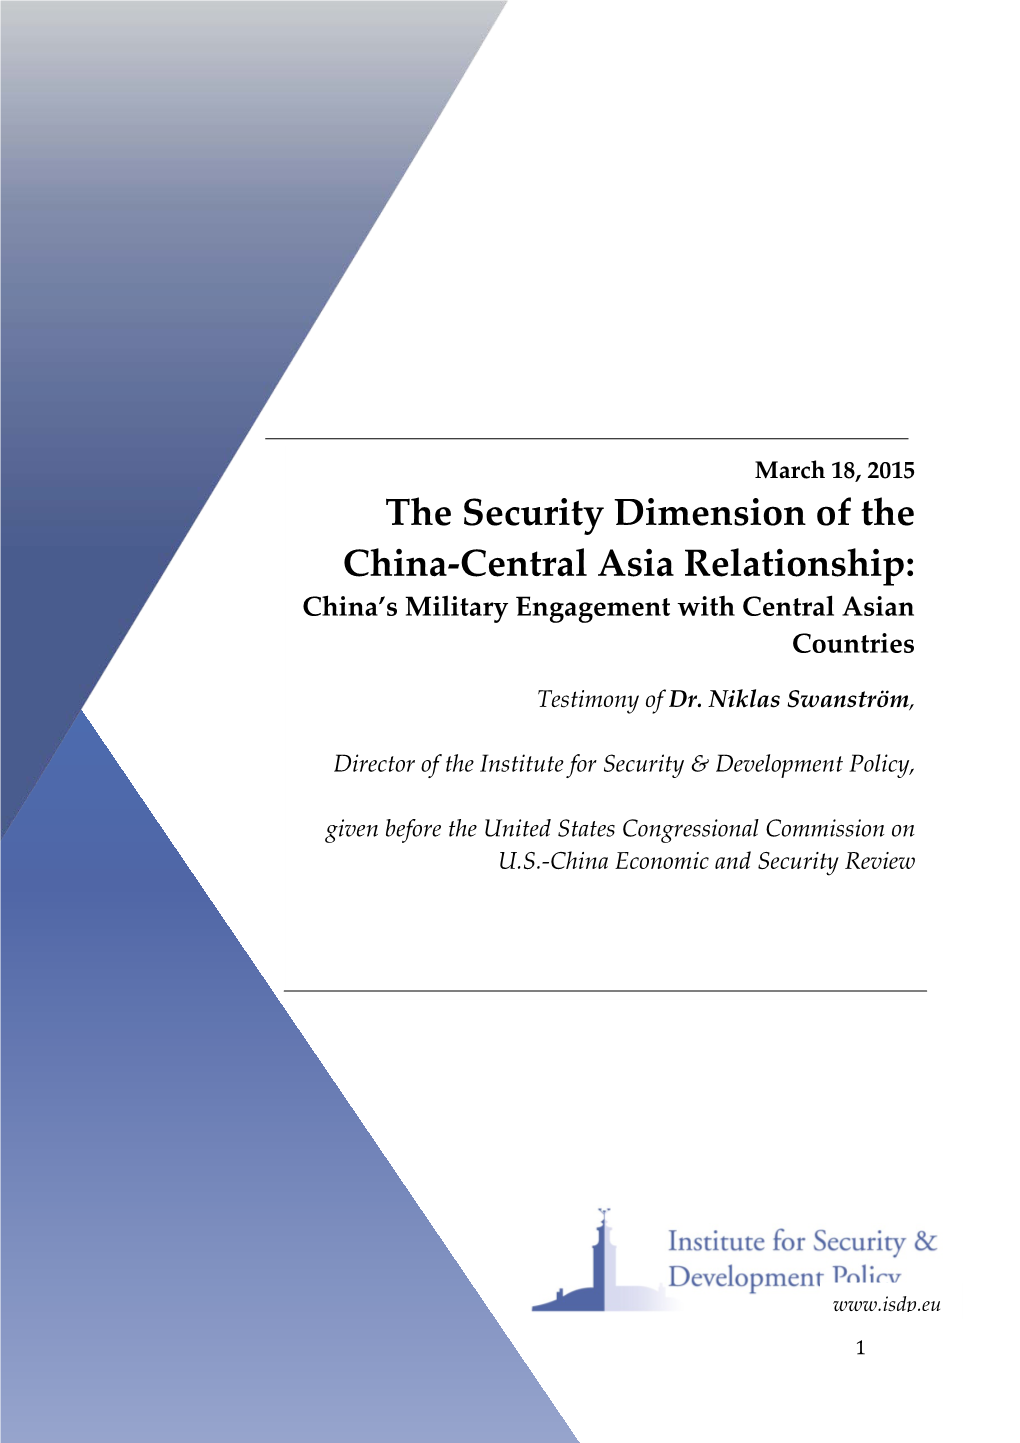 The Security Dimension of the China-Central Asia Relationship: China’S Military Engagement with Central Asian